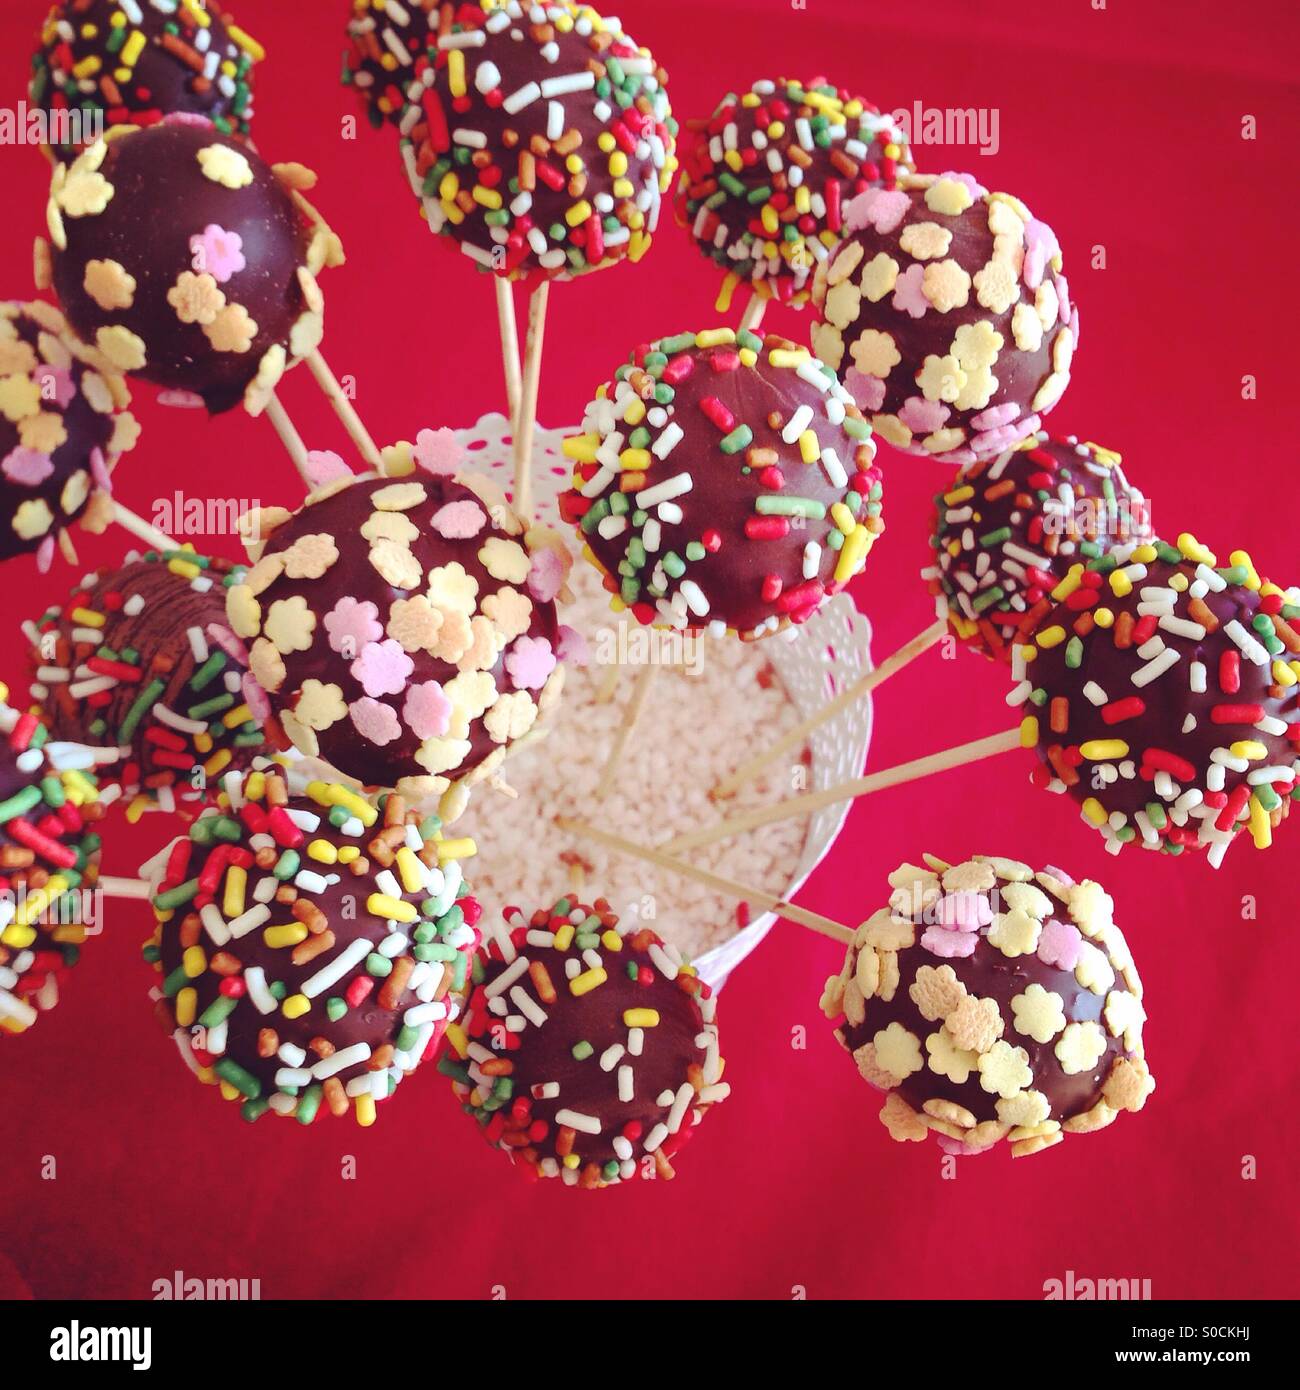 Many chocolate cakepops with sprinkles on red background Stock Photo